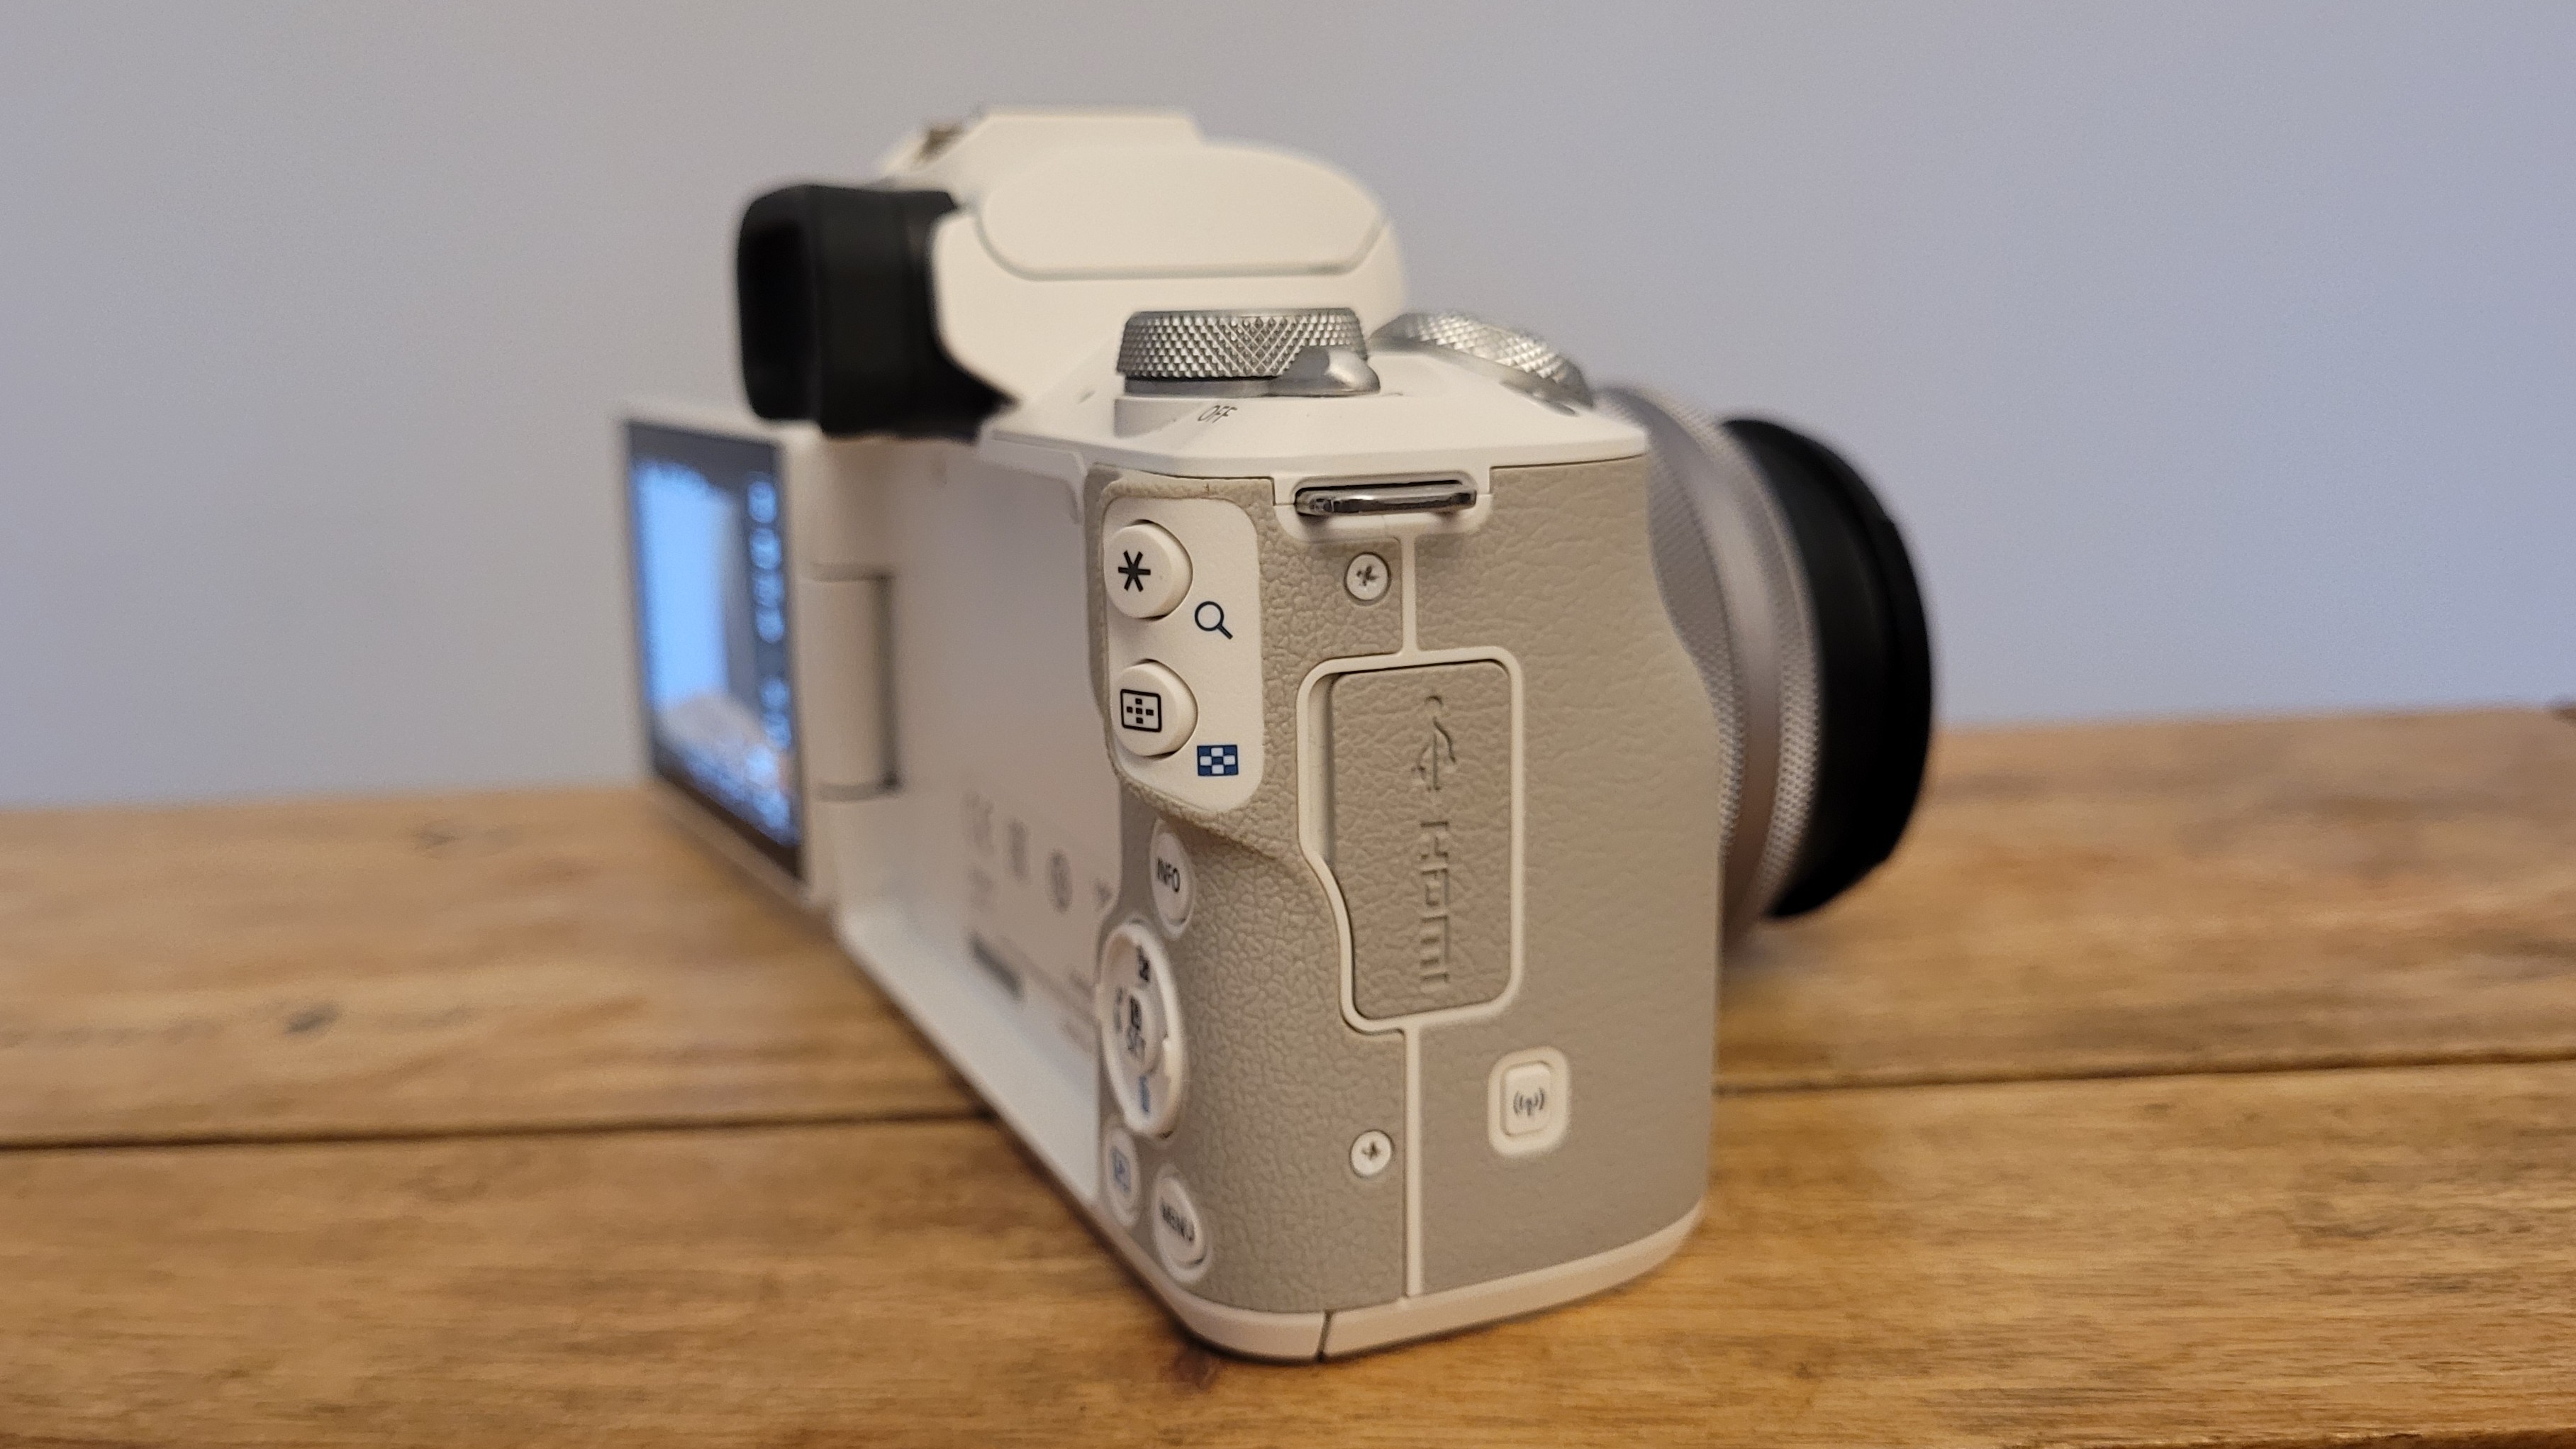 The EOS M50 Mark II has a generous grip although the buttons on the back are a little close together for our liking